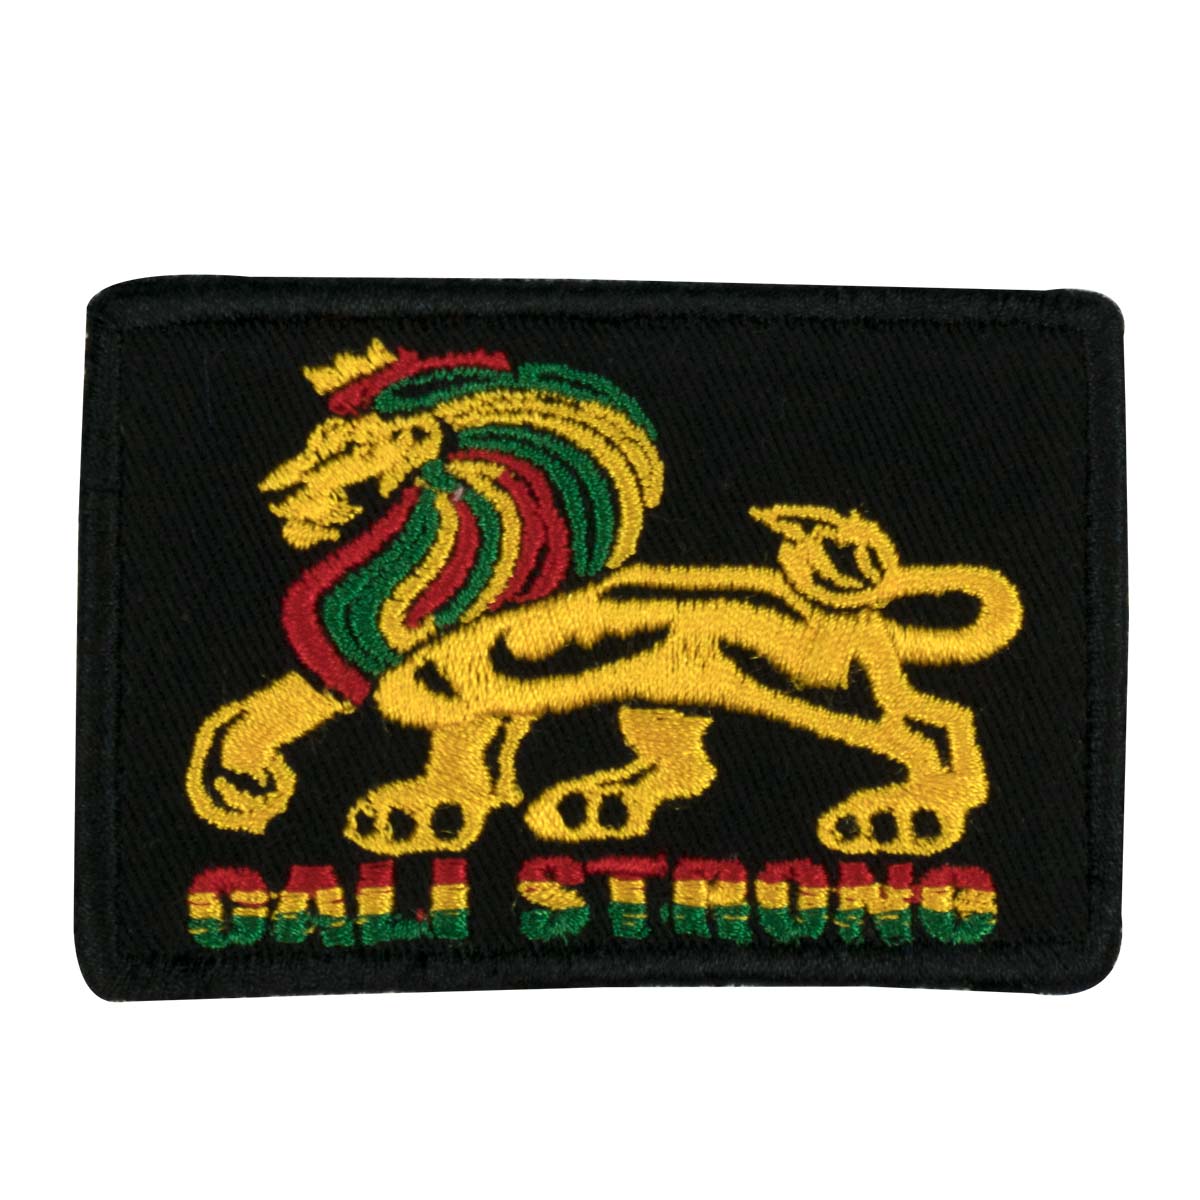 CALI Strong Lord Rasta Black Raised Hook-and-Loop 2x3 Morale Patch - Patches - Image 1 - CALI Strong